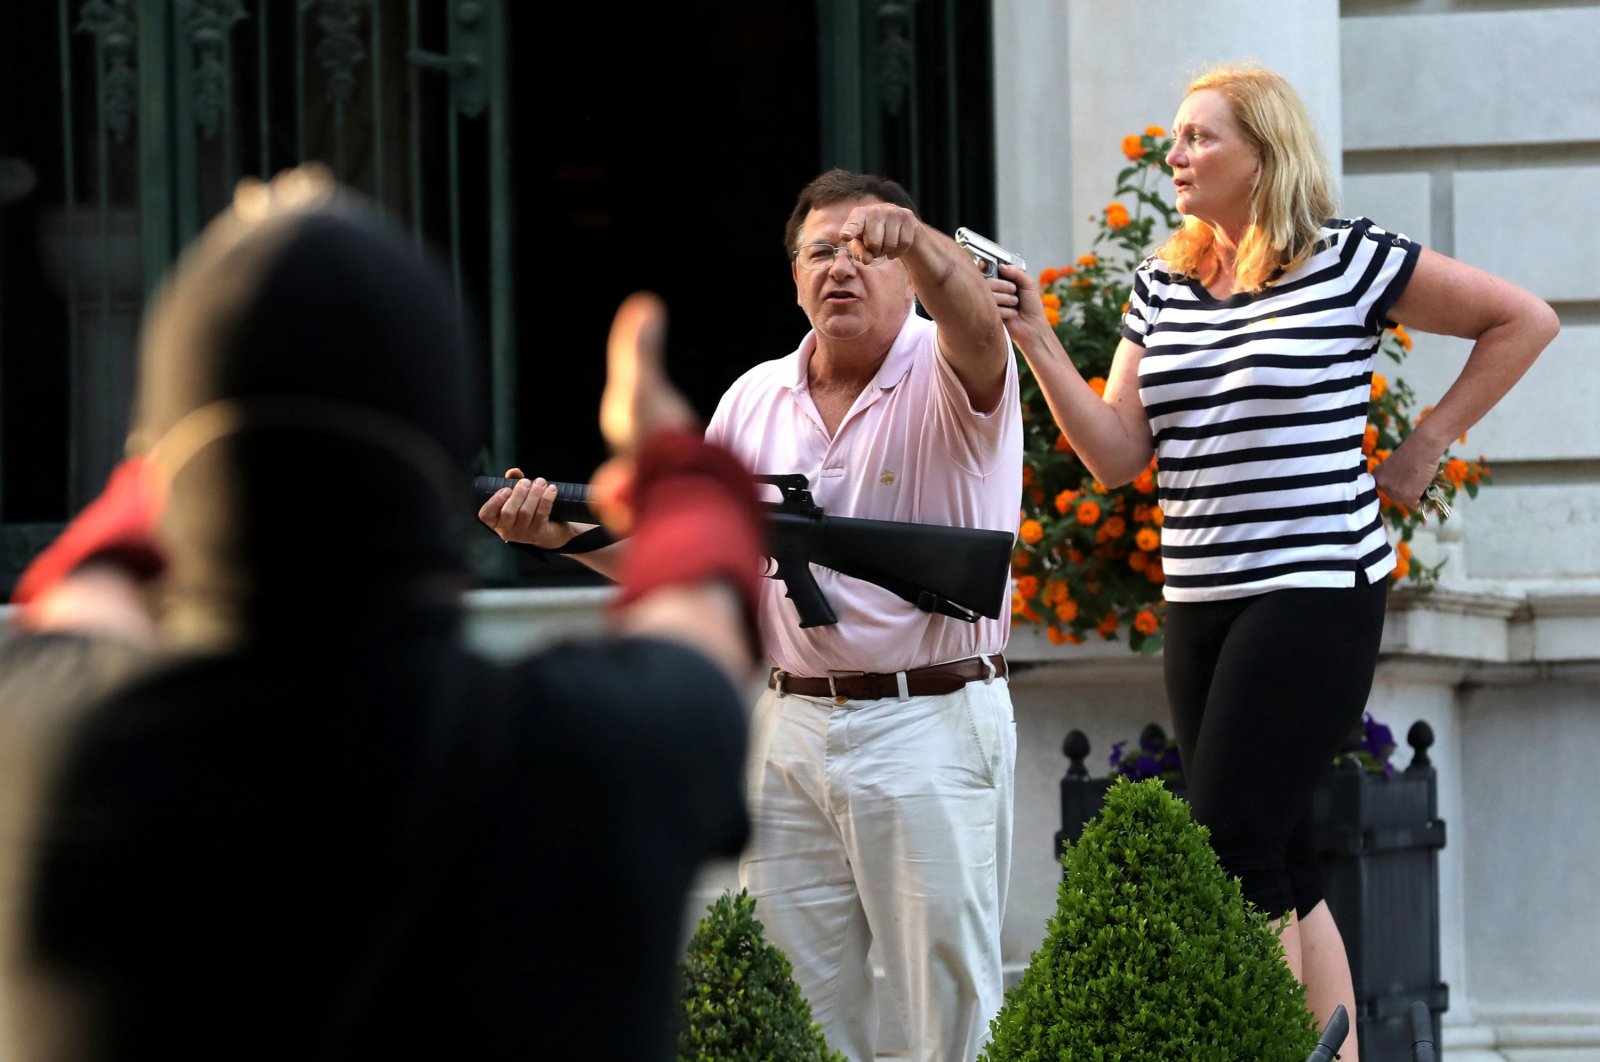 Armed homeowners Mark and Patricia McCloskey stand in front of their house as they confront peaceful protesters marching past their home to St. Louis Mayor Lyda Krewson's house, June 28, 2020, U.S. (Getty Images)